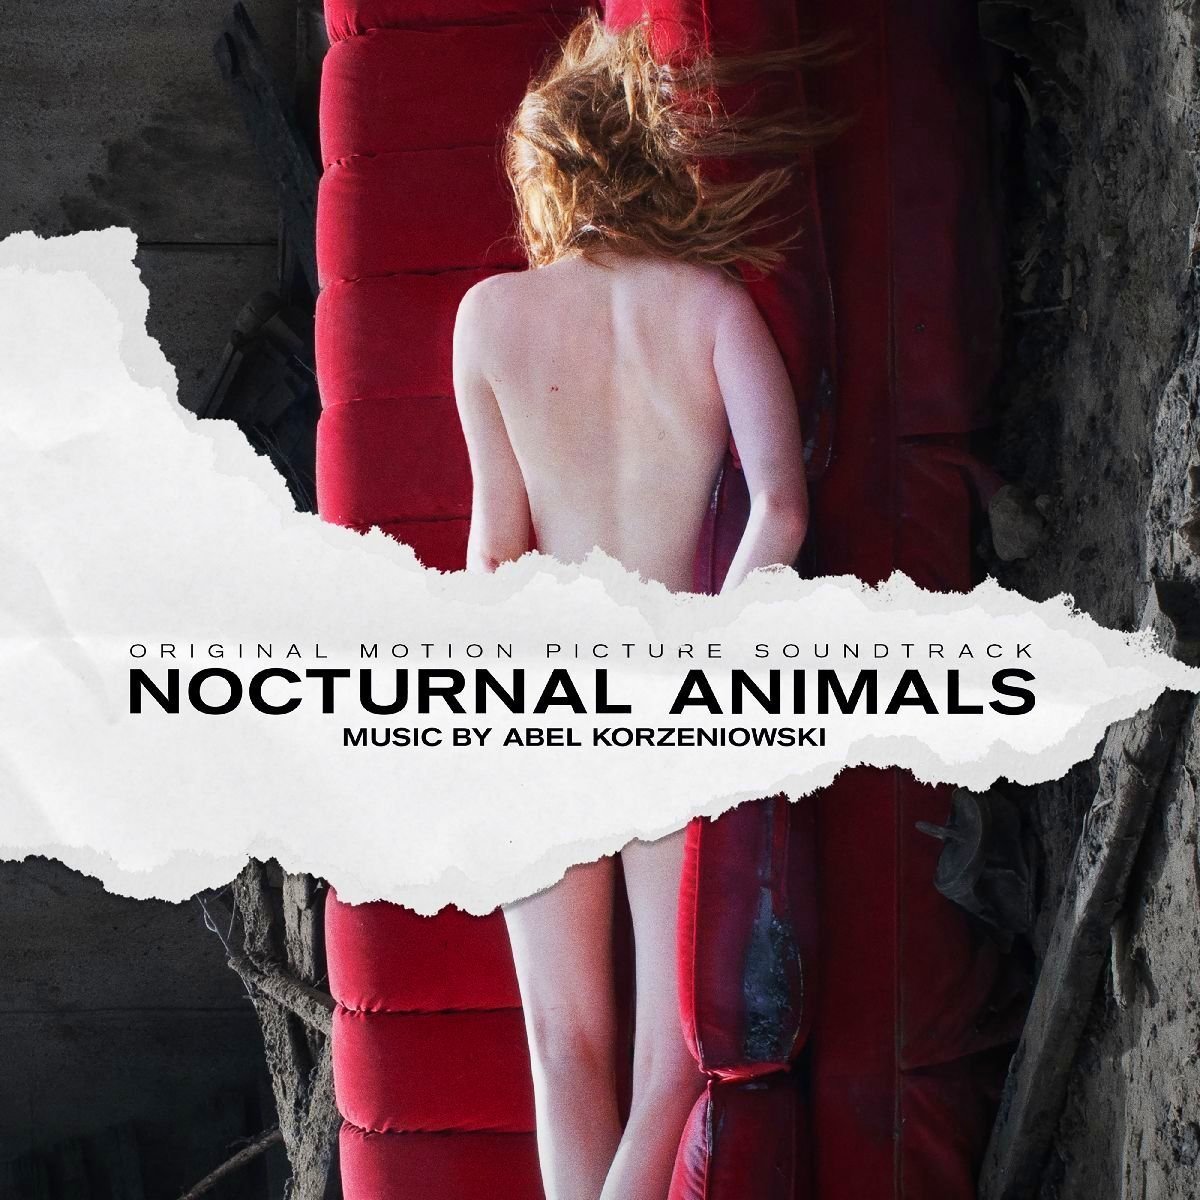 ost 02 17 Nocturnal